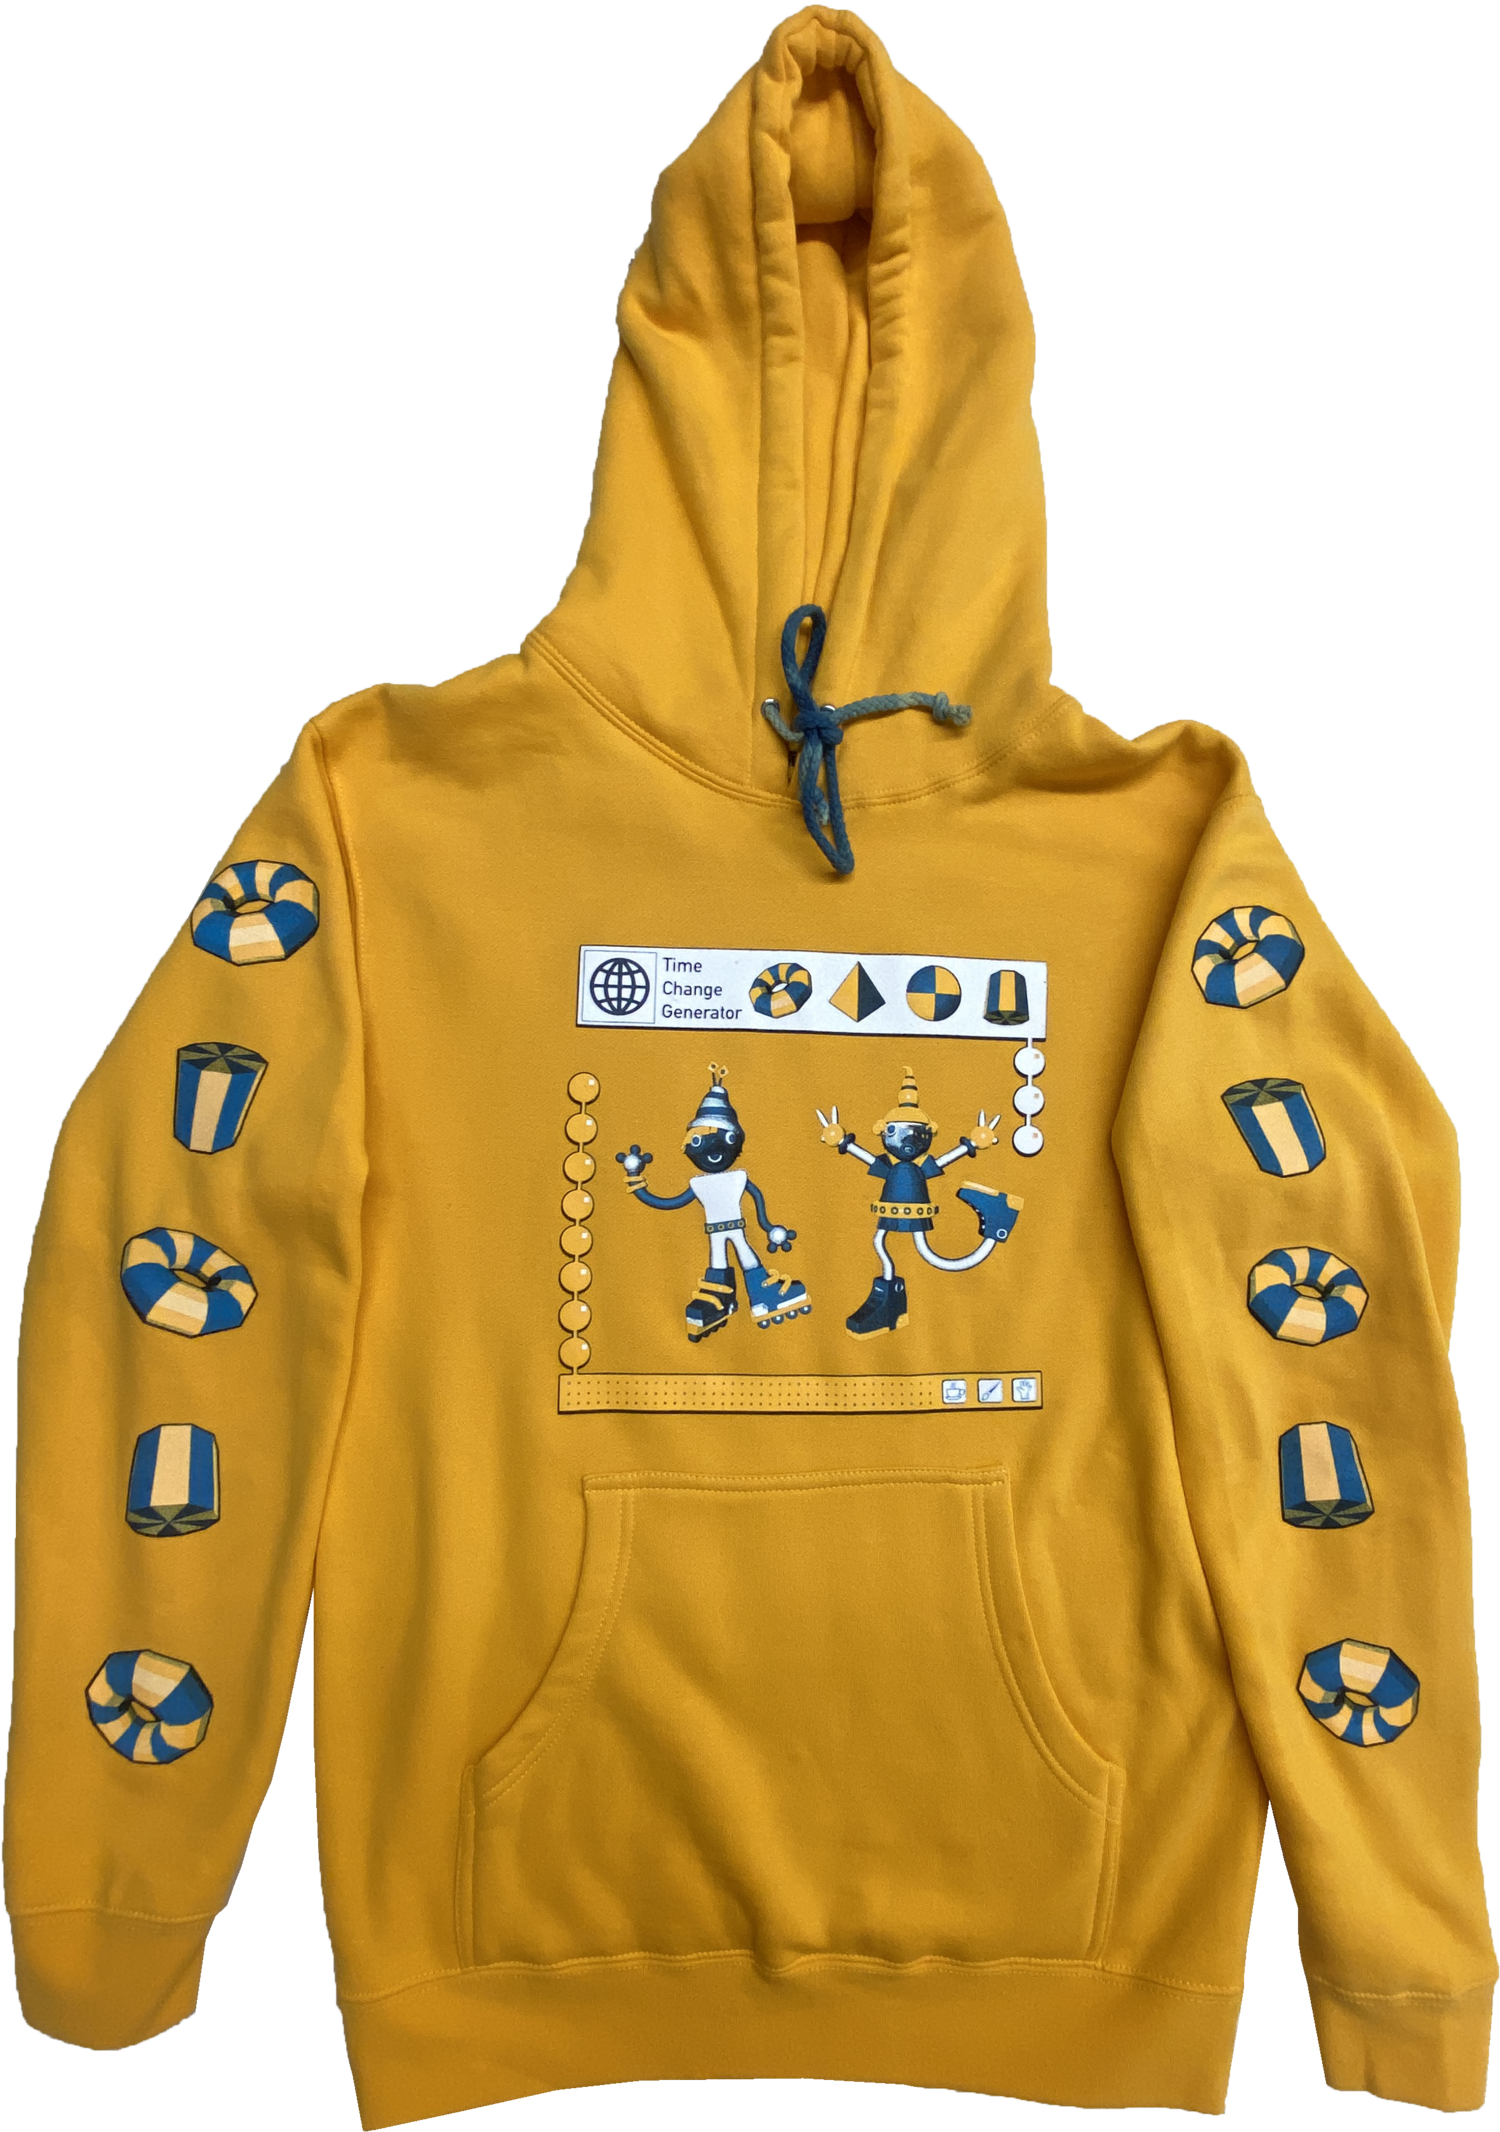 Long-sleeve bright yellow hoodie with 3D graphics on the chest and sleeves